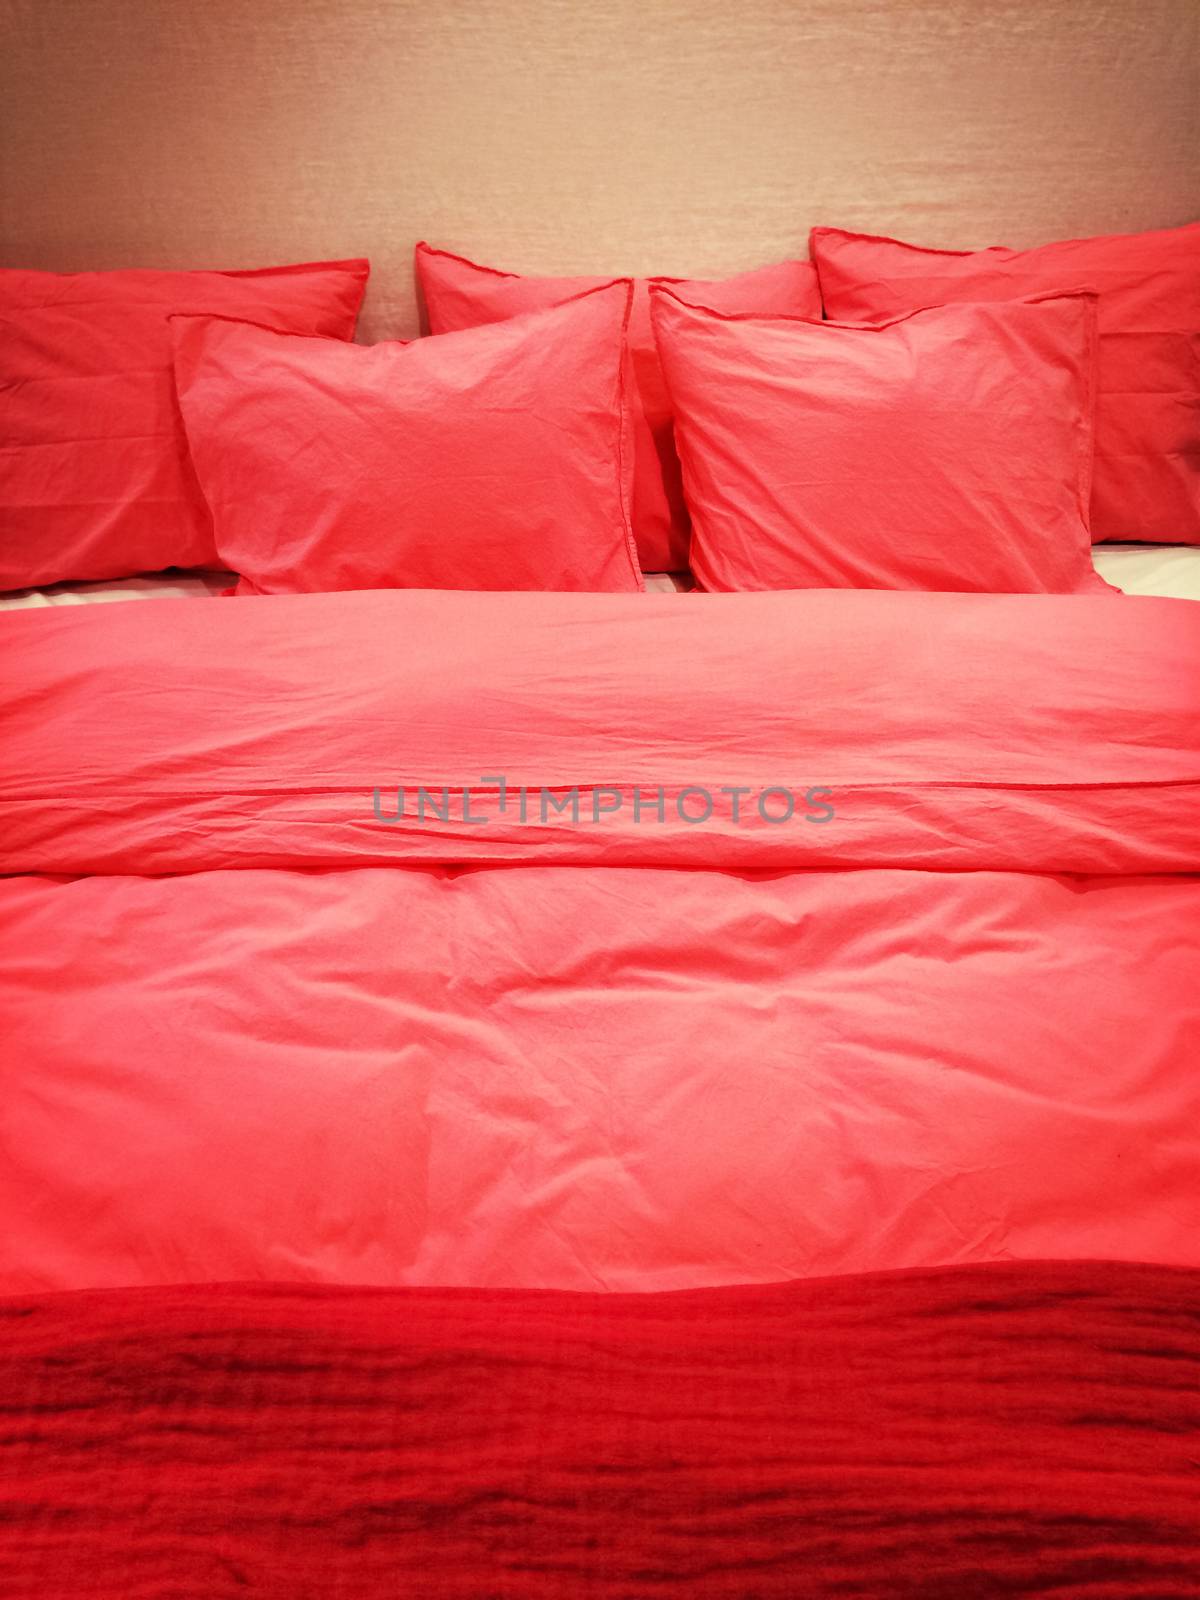 Bed with lots of pillows and red romantic bed linen.